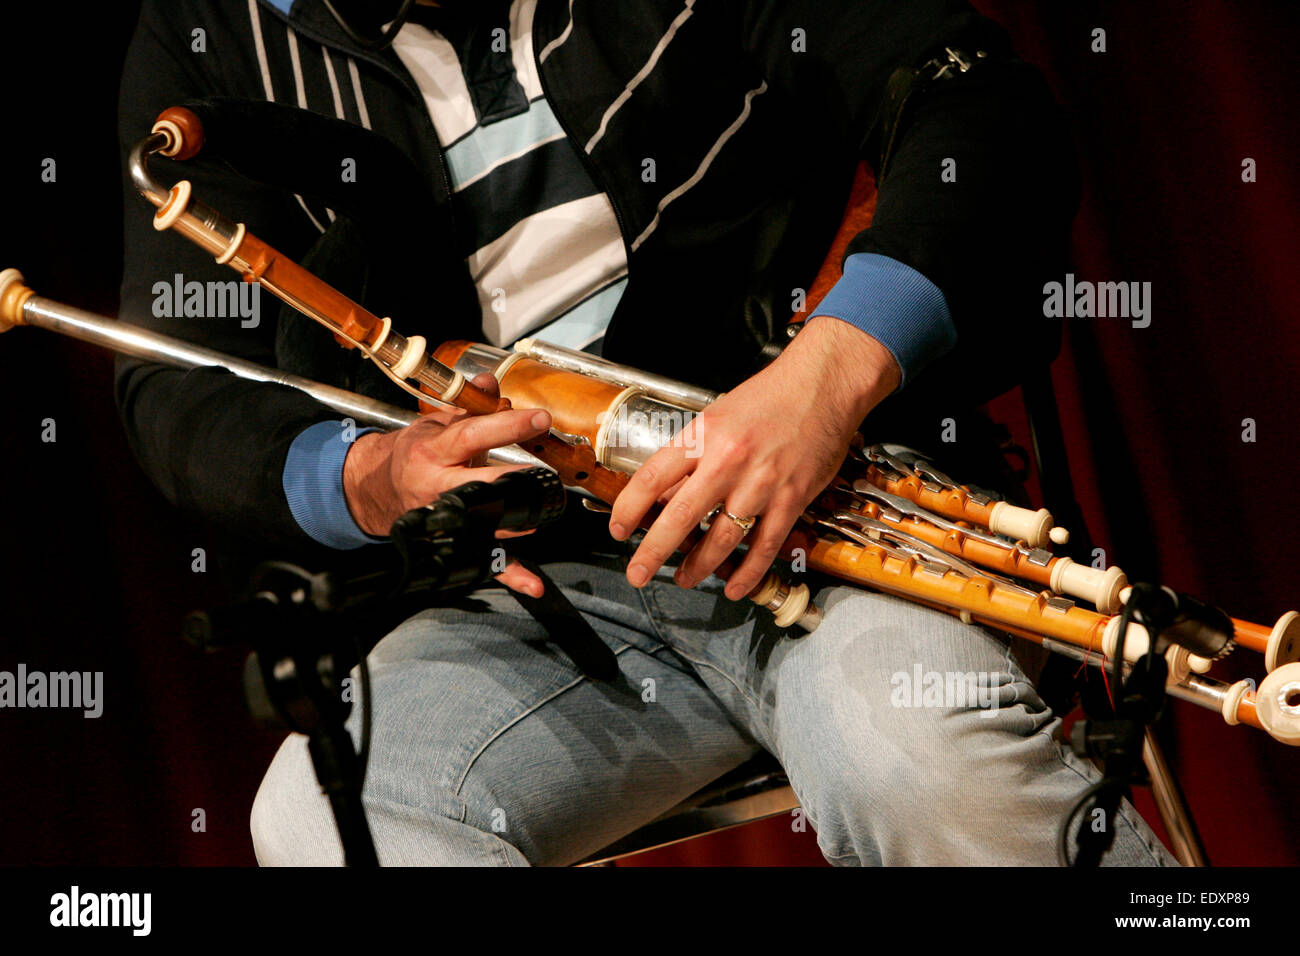 man playing uilleann pipes at a traditional irish folk event Stock Photo